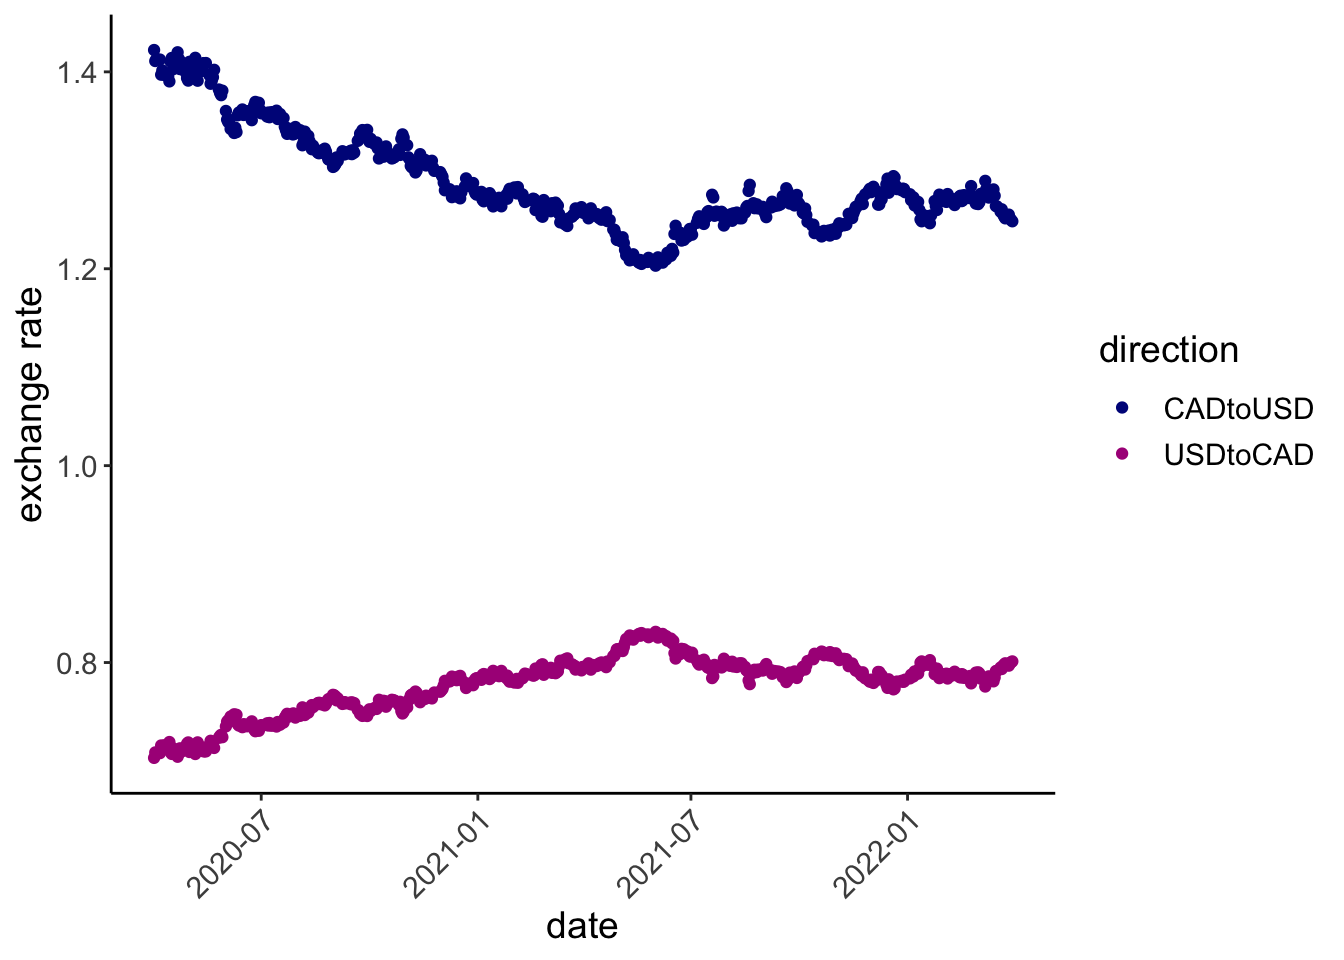 Exchange rates between US and Canada during the COVID-19 pandemic. x-axis: dates from April 2020 to April 2022. y-axis: exchange rate (Canadian to US in Blue, US to Canadian in Magenta). Two curves with imperfect mirroring on arithmetic scale.